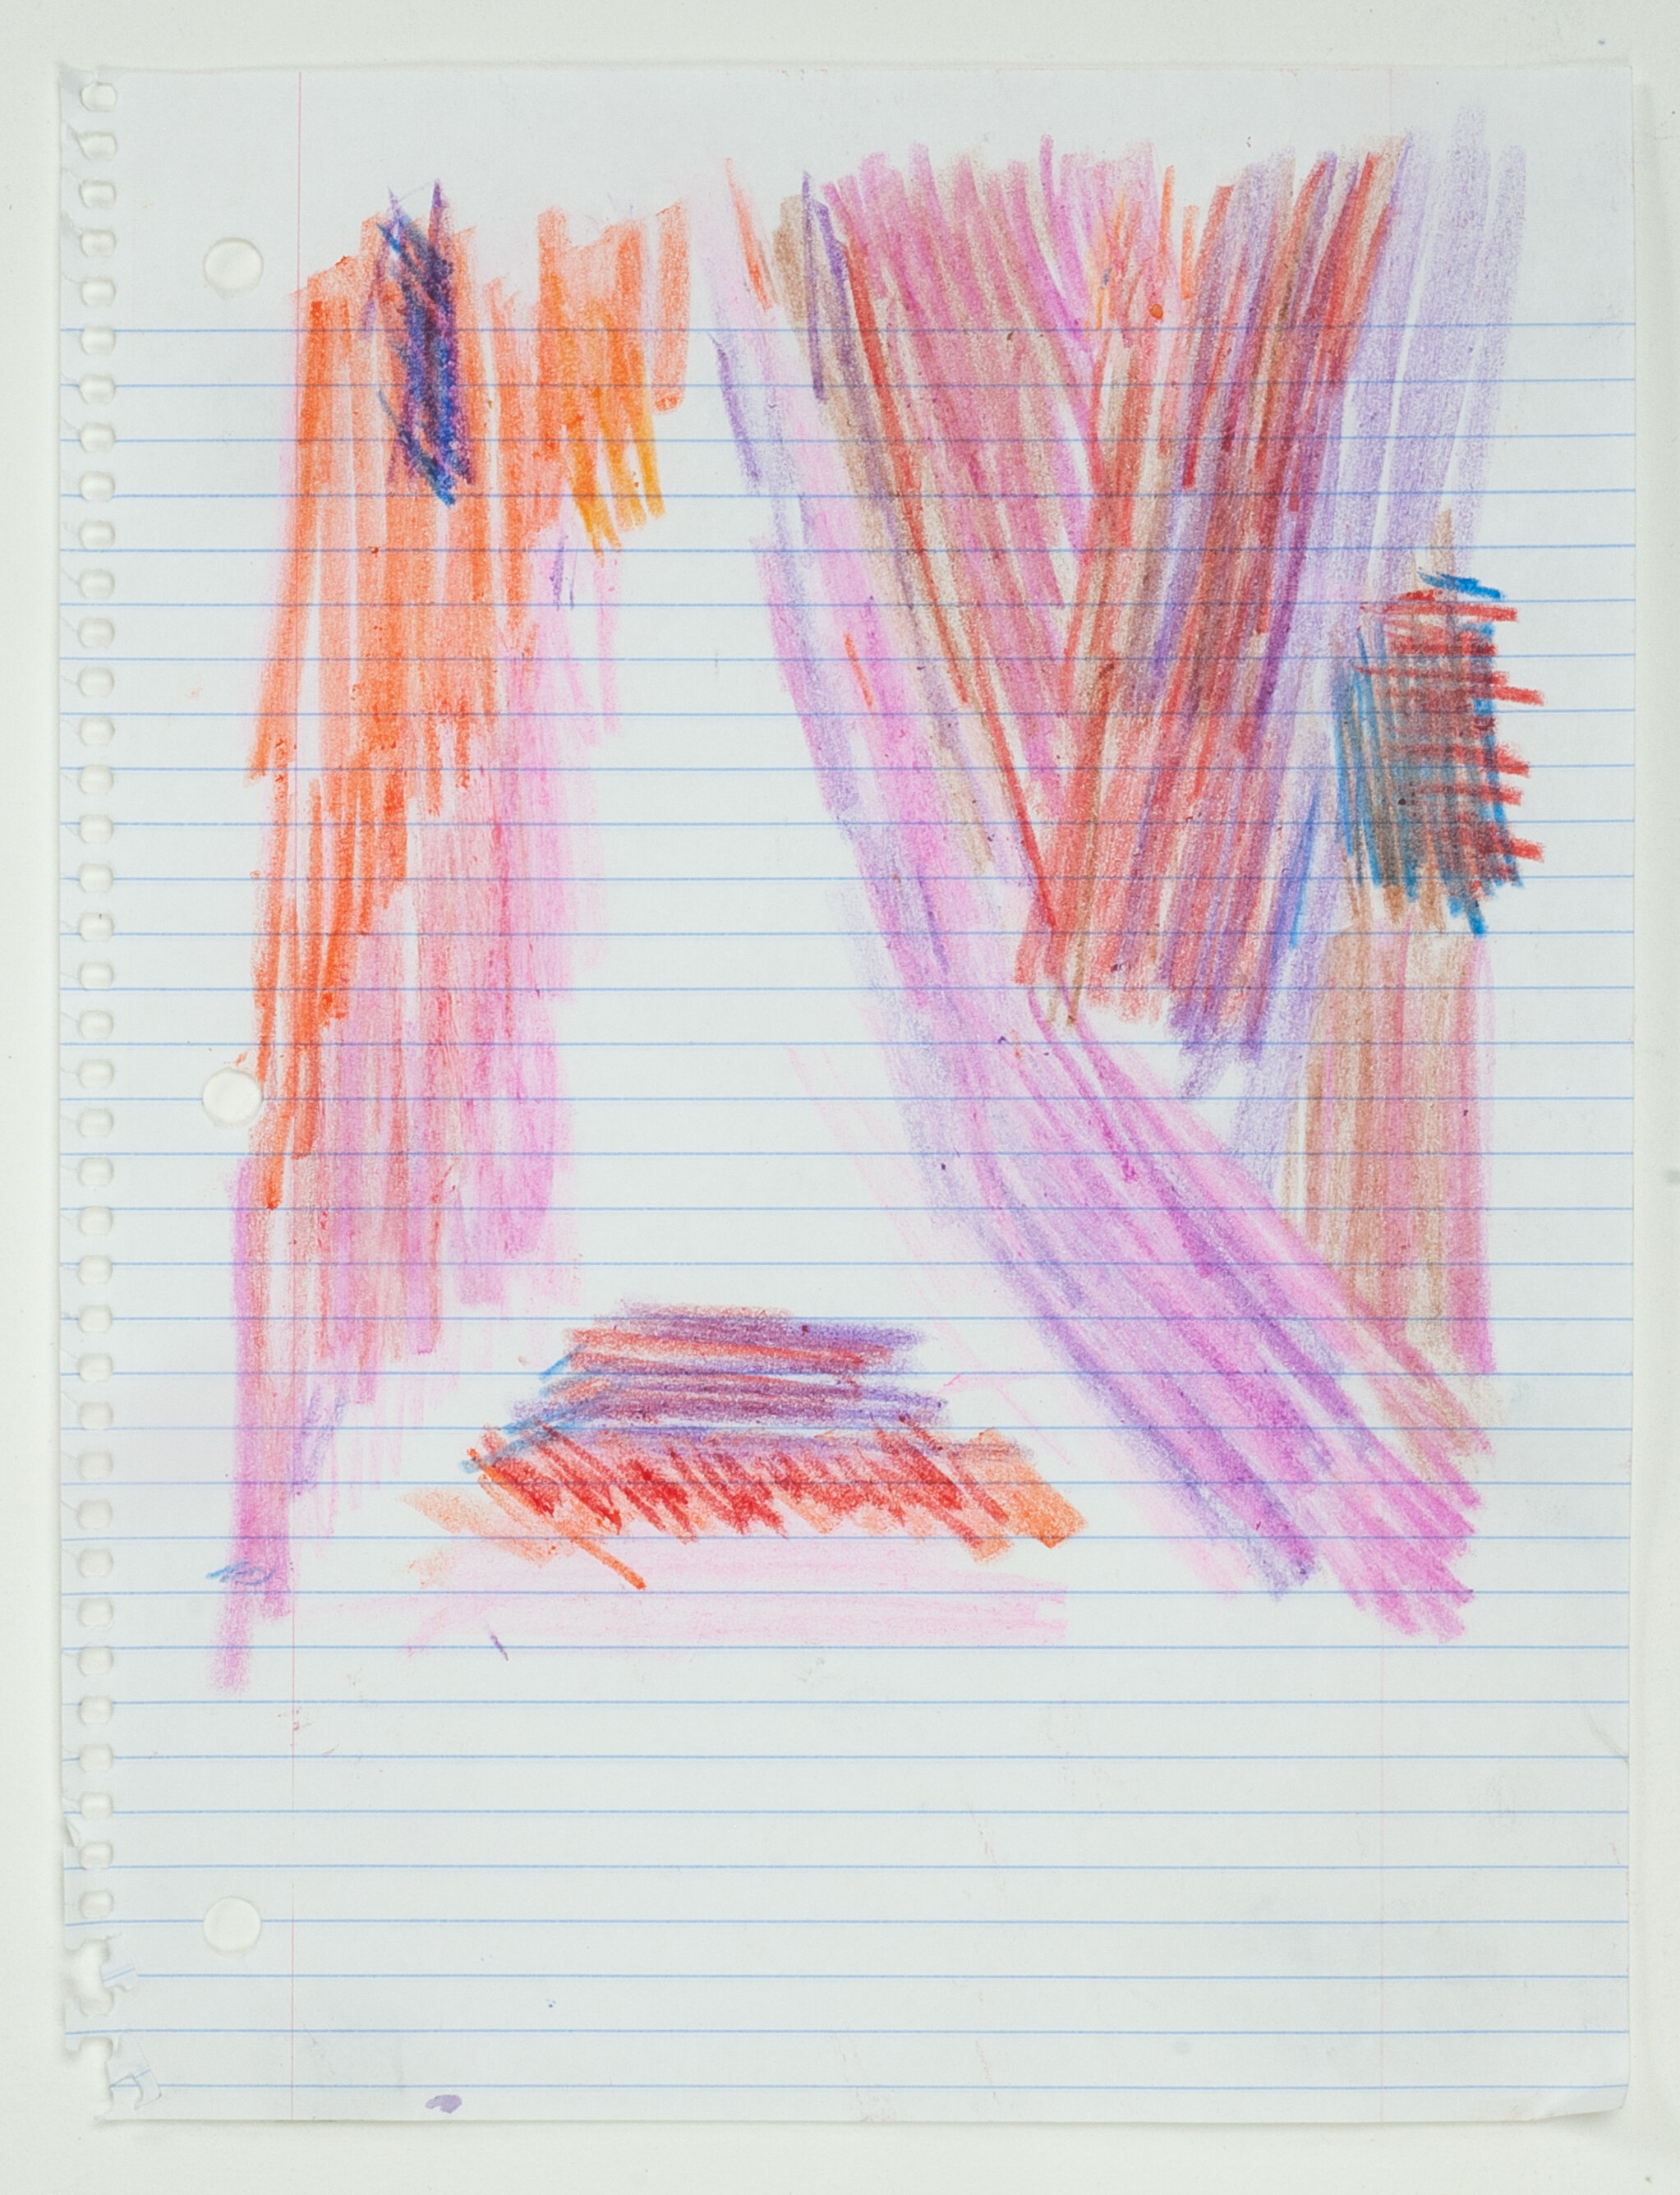   sm_wop2020_20 , 2020 crayon on paper, 11 x 8.5 in. 